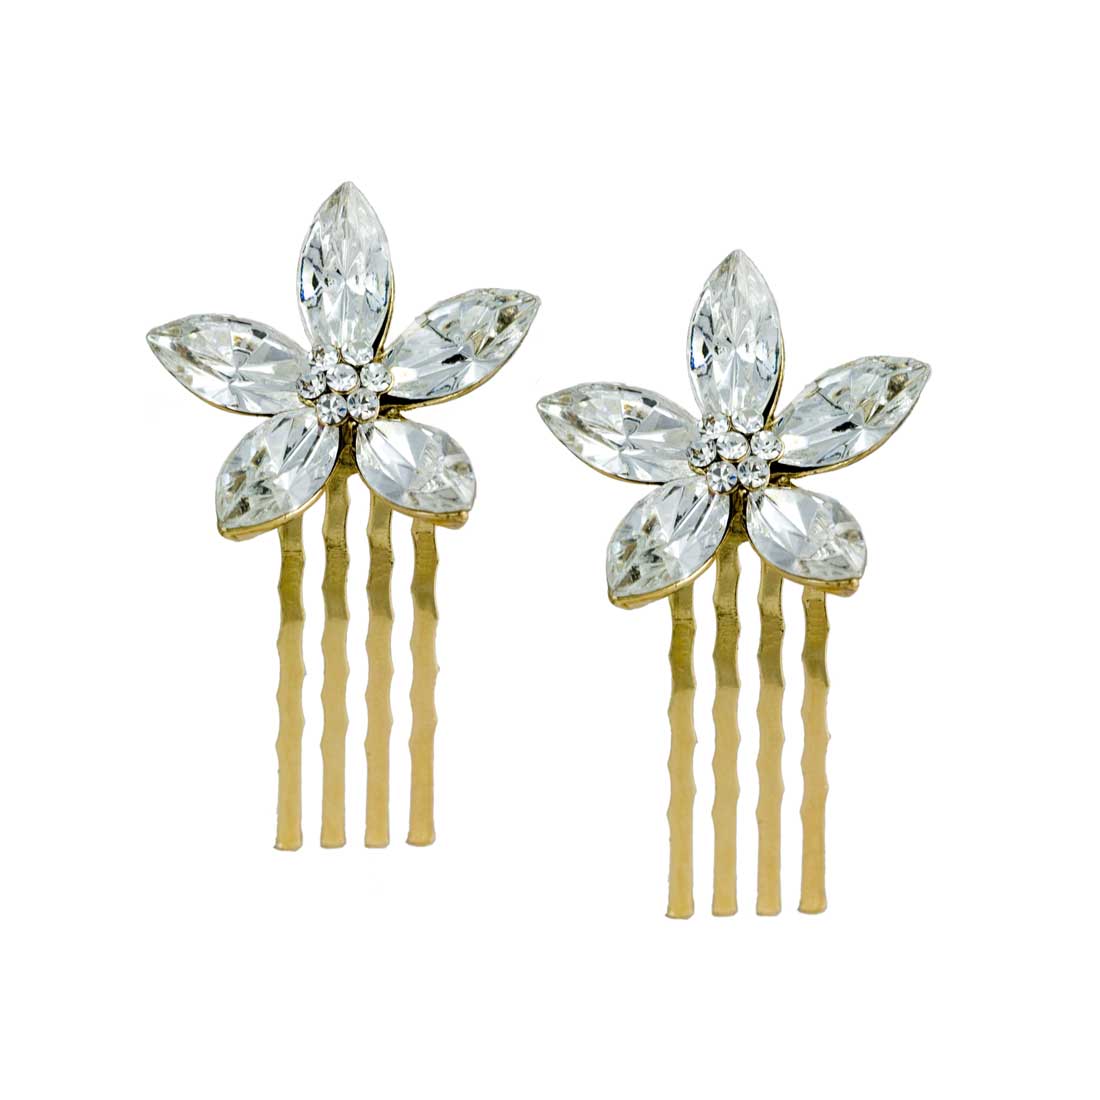 Petals of Romance Small Gold Hair Combs for Brides, Weddings & Occasions